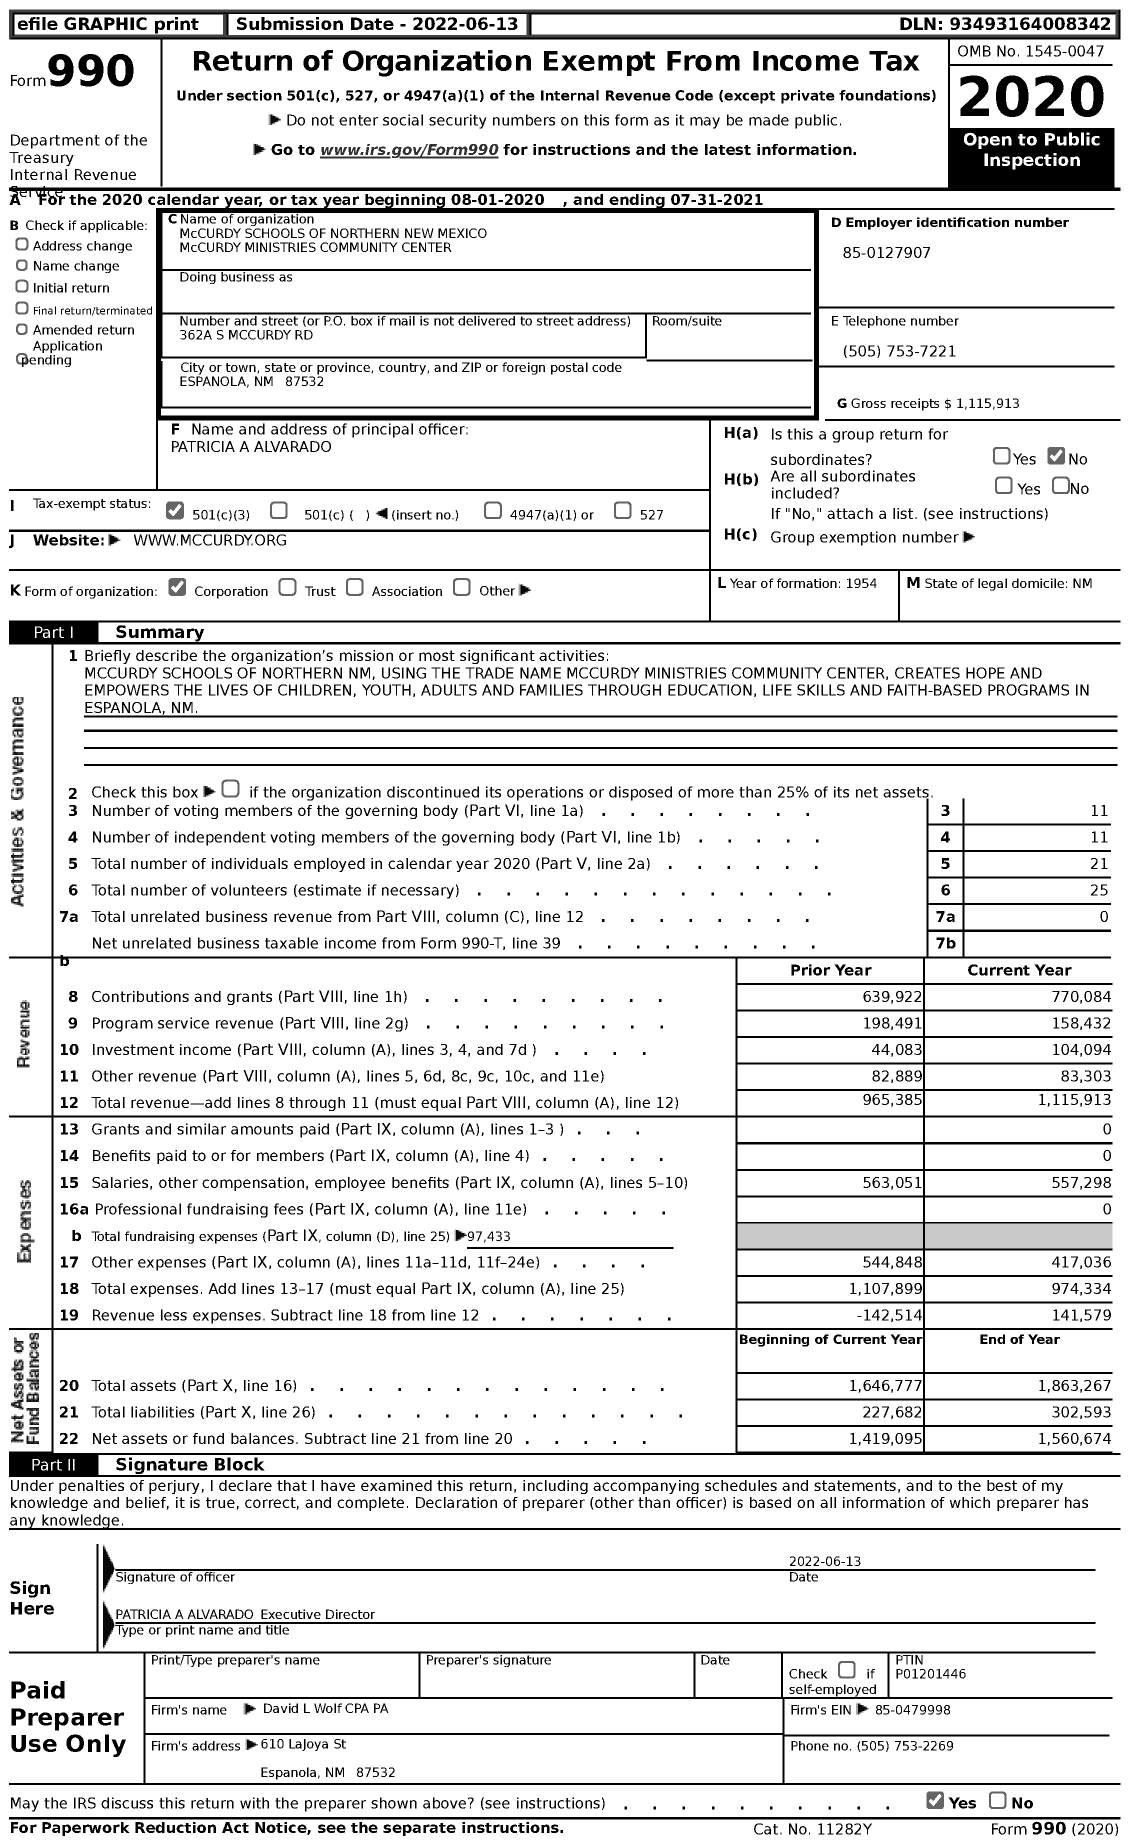 Image of first page of 2020 Form 990 for McCURDY SCHOOLS OF NORTHERN NEW MEXICO McCURDY MINISTRIES COMMUNITY CENTER